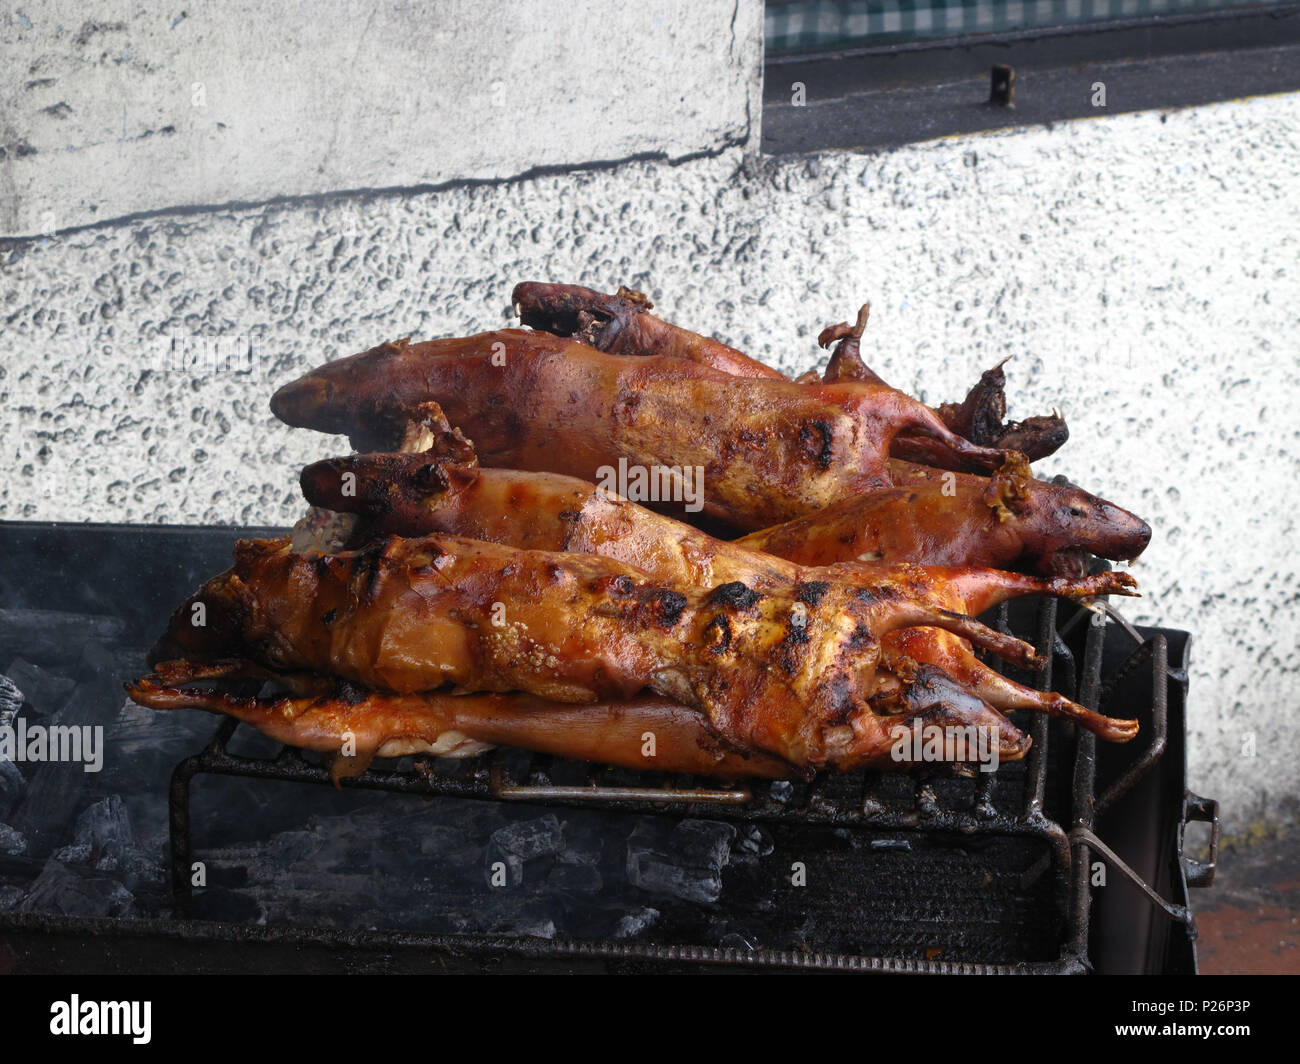 Cuy, a traditional plate in Andean countries in south america is roasted guinea pig Stock Photo